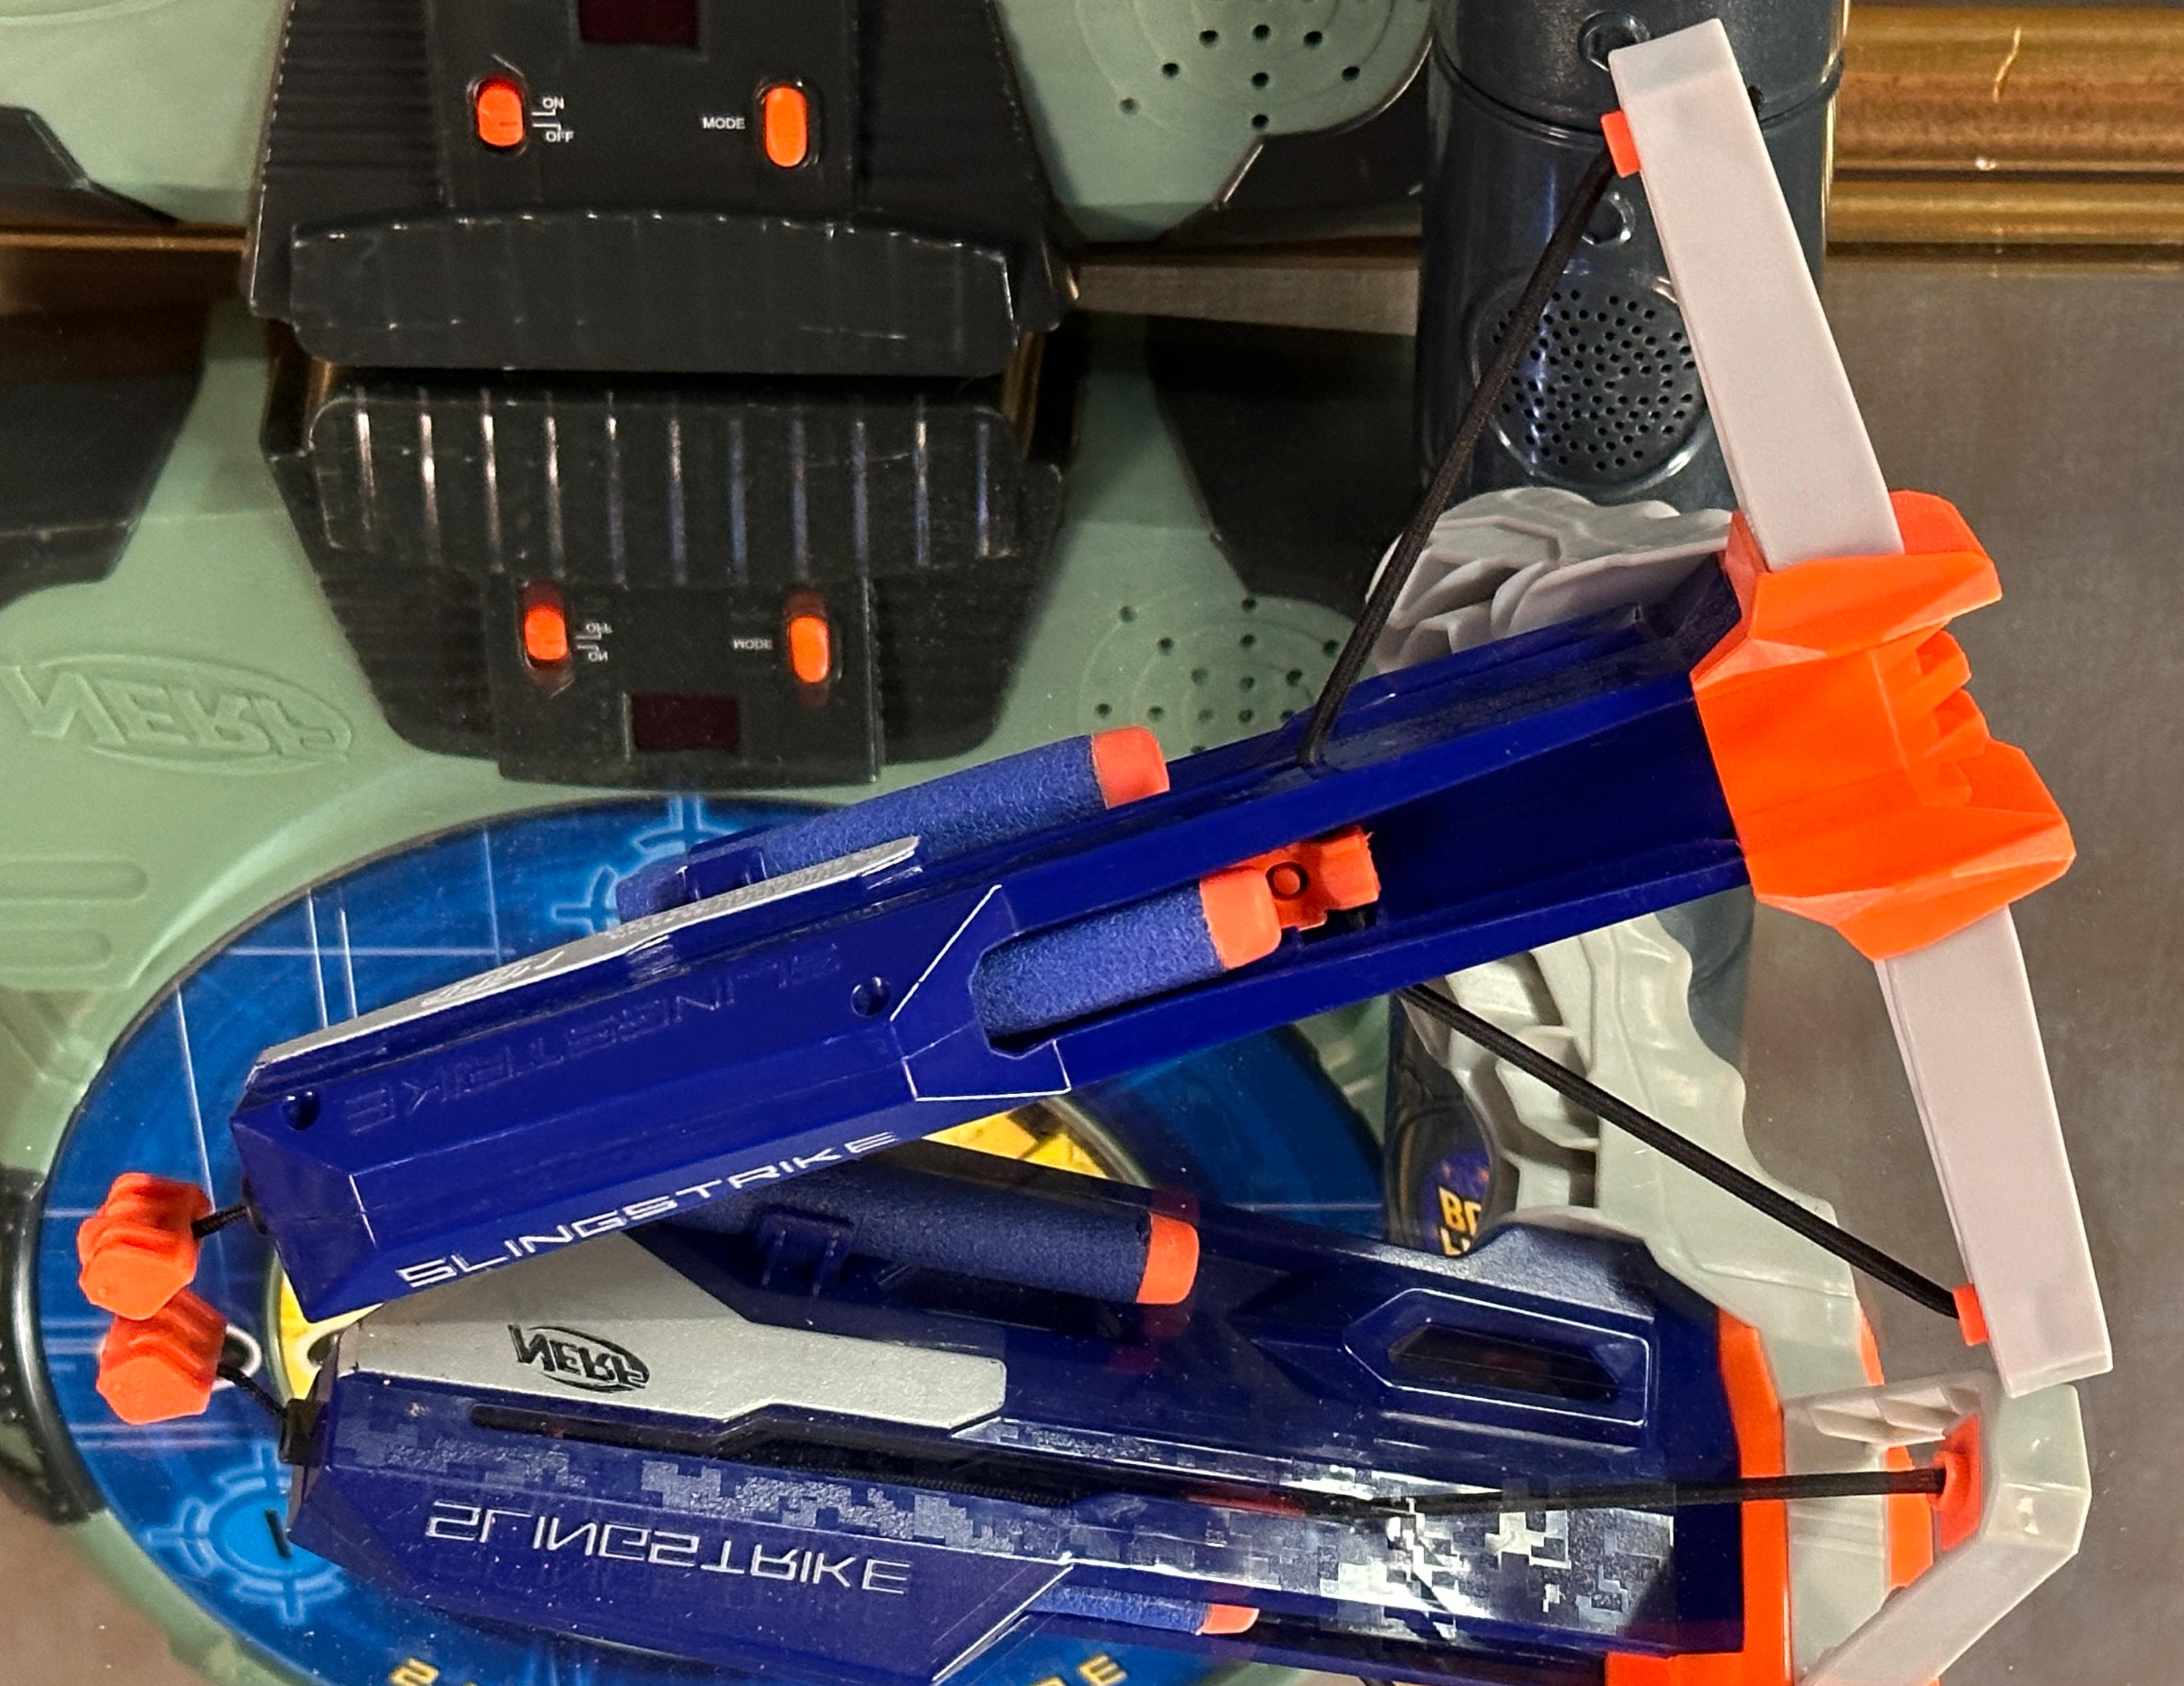 Assorted NERF Collection